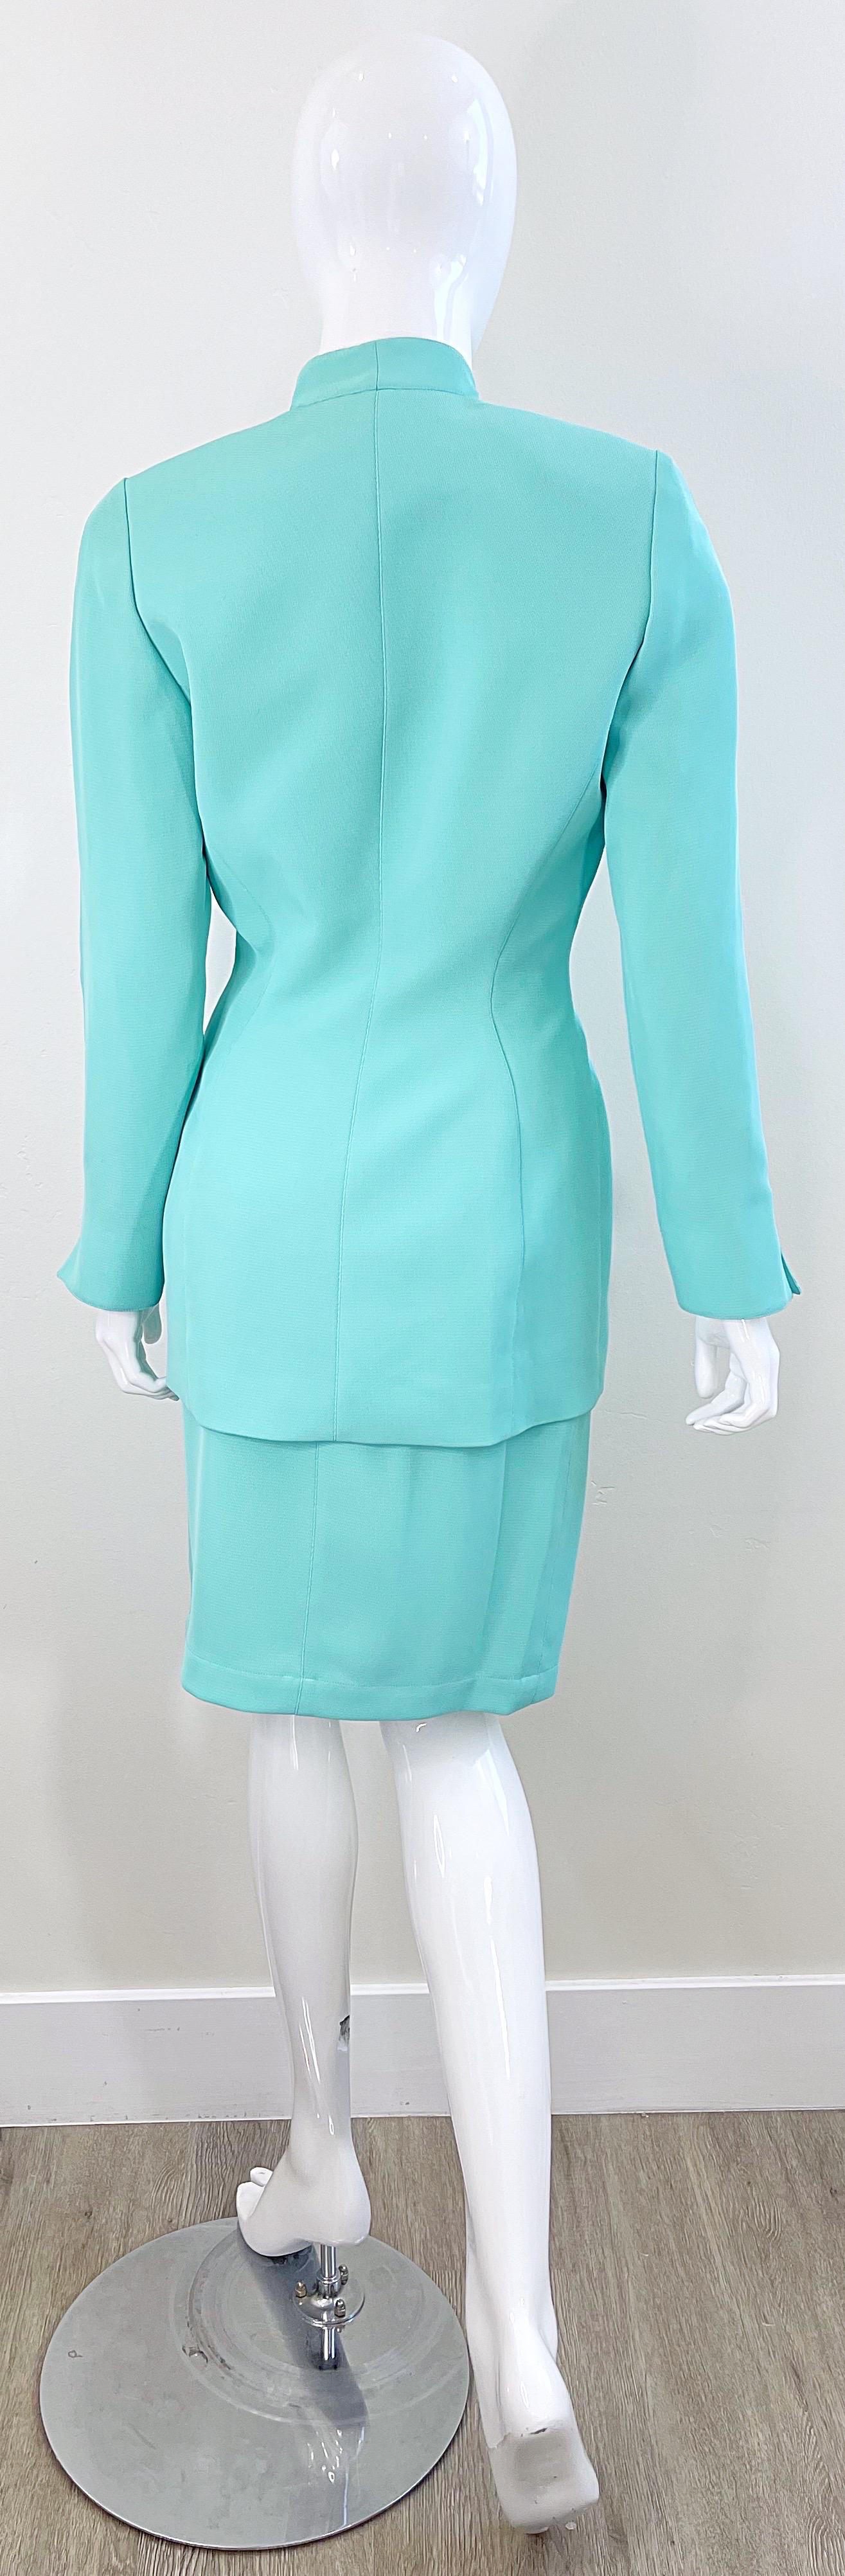 NWT Vintage Thierry Mugler F/W 1988 Mint Blue Size 38 1980s Skirt Suit For Sale 1